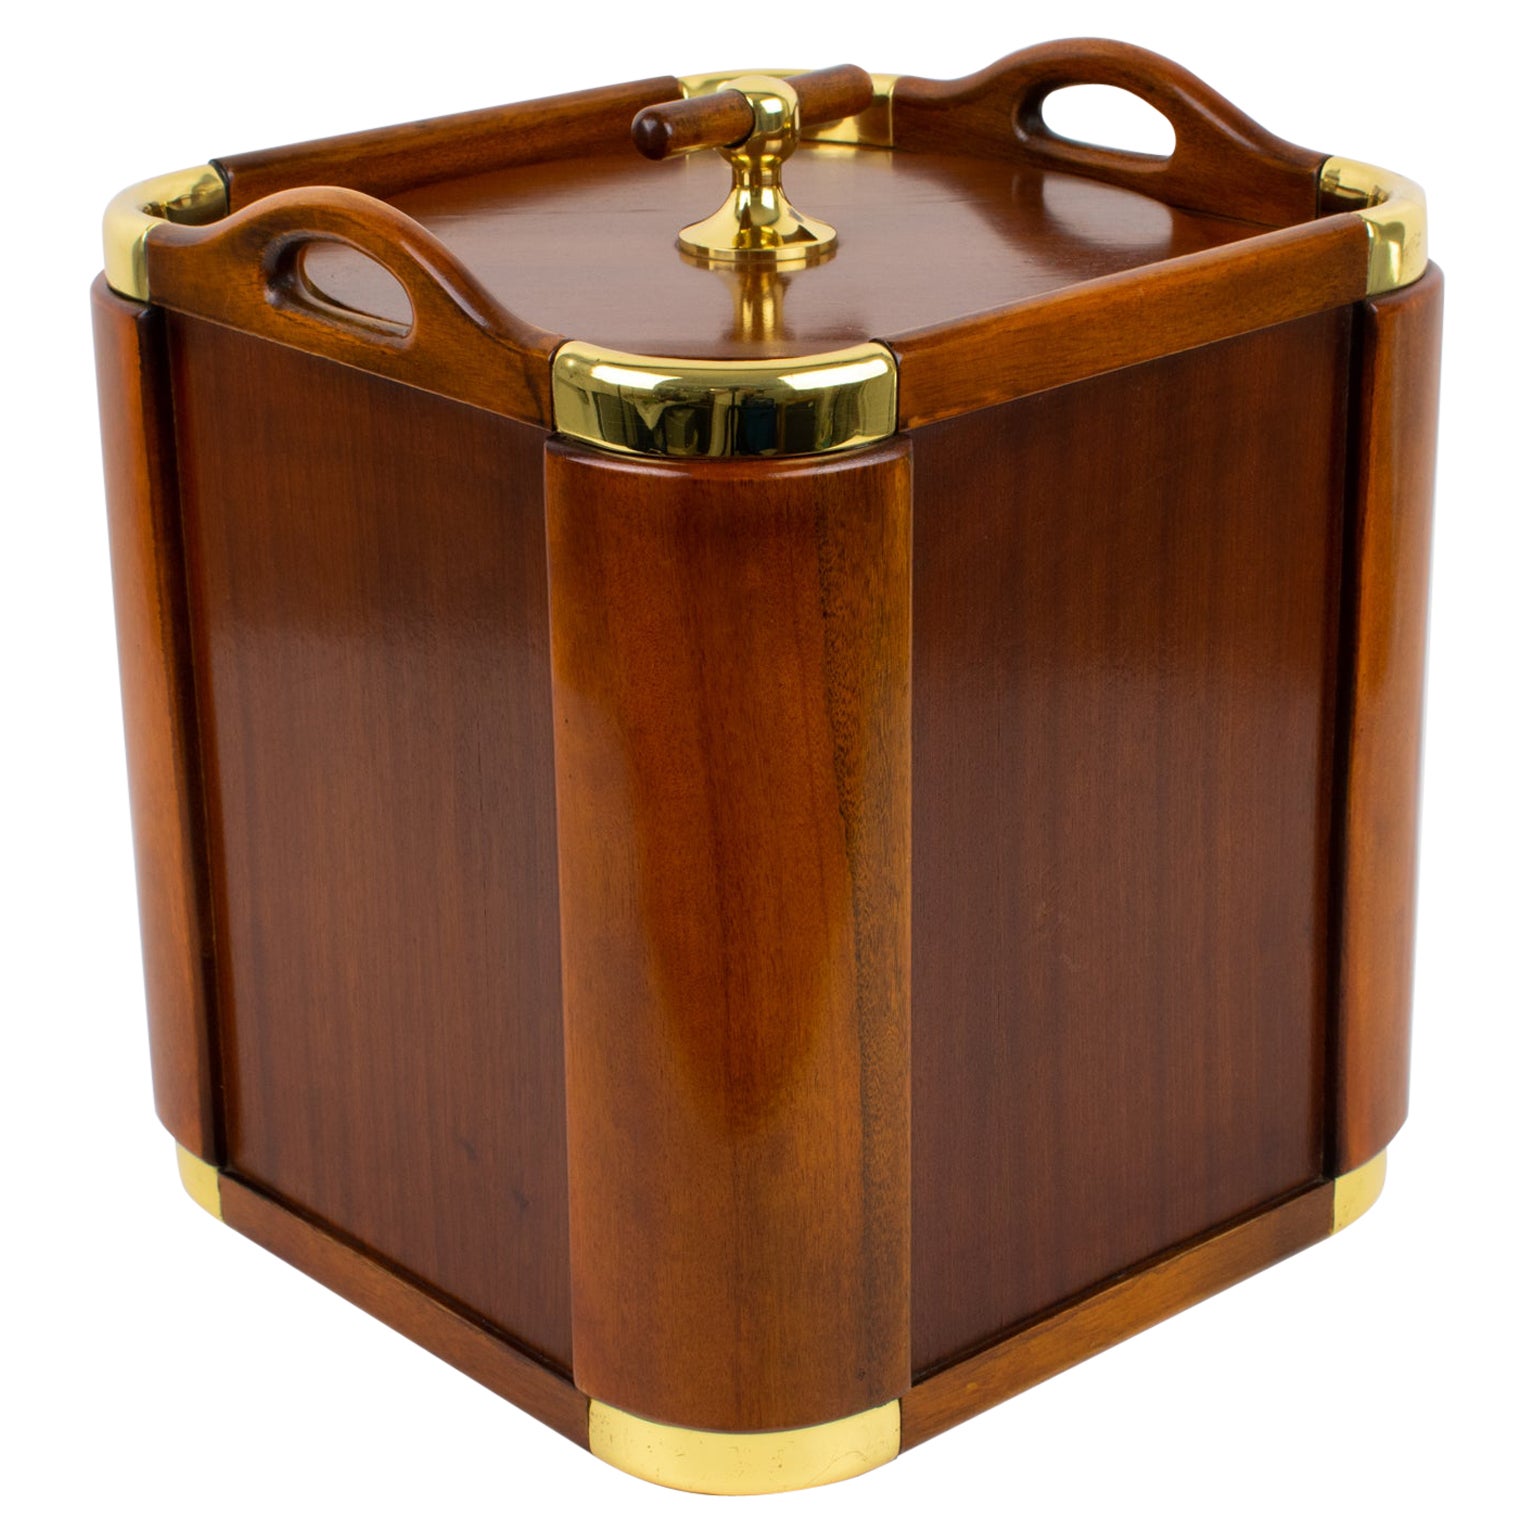 Valenti Spain 1960s Modernist Wood and Brass Ice Bucket Champagne Cooler